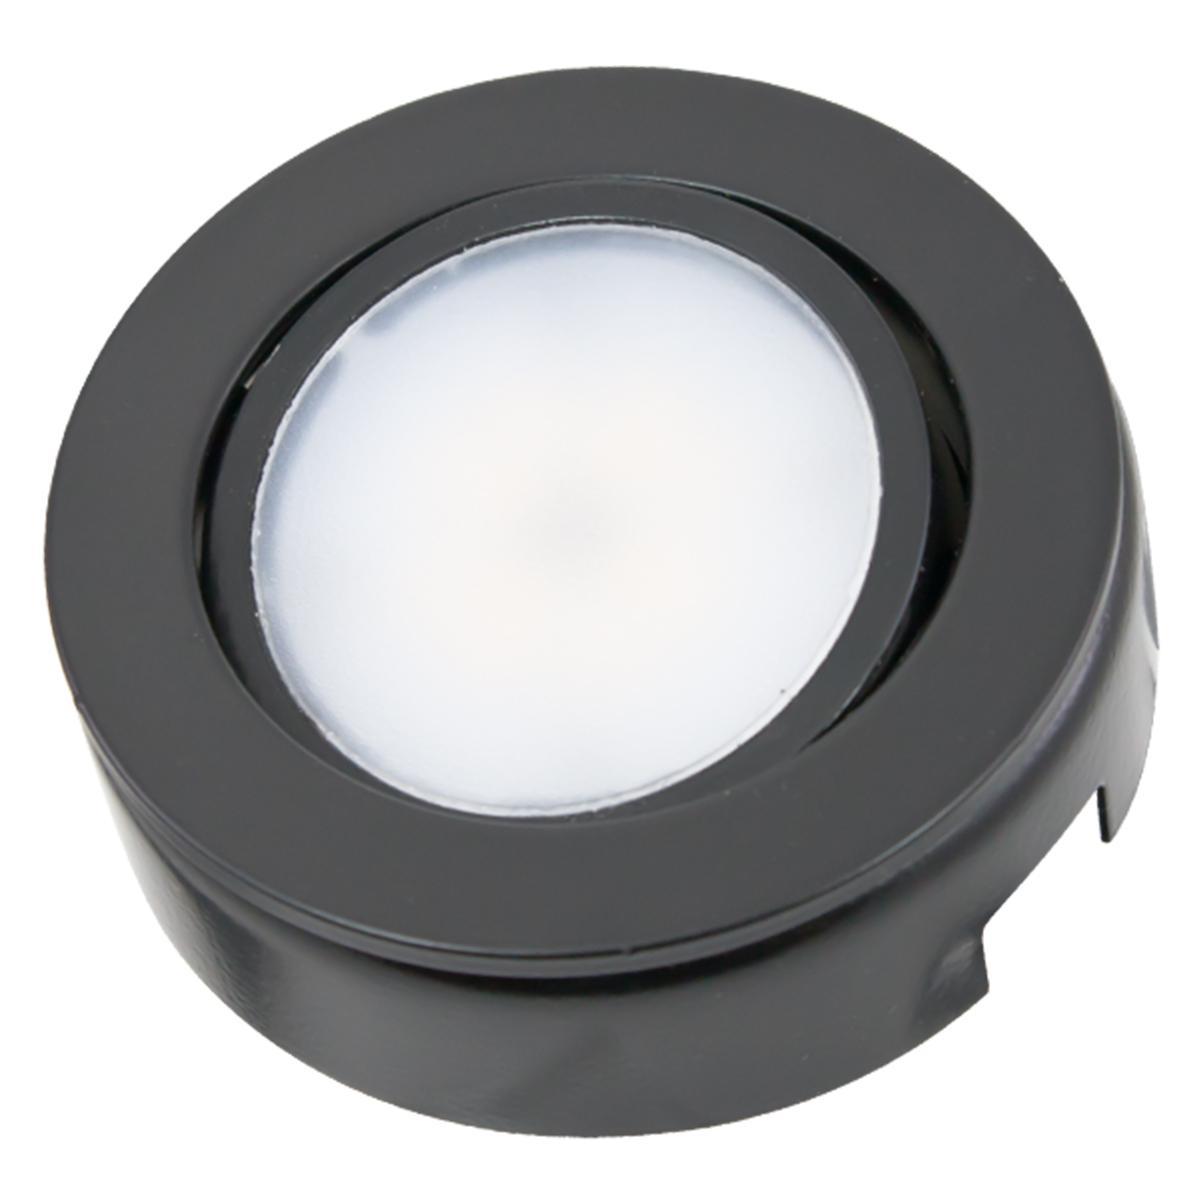 MVP LED Puck Light with Lead and Tail wires, 4.3 Watts, 2700K, 120V, Black